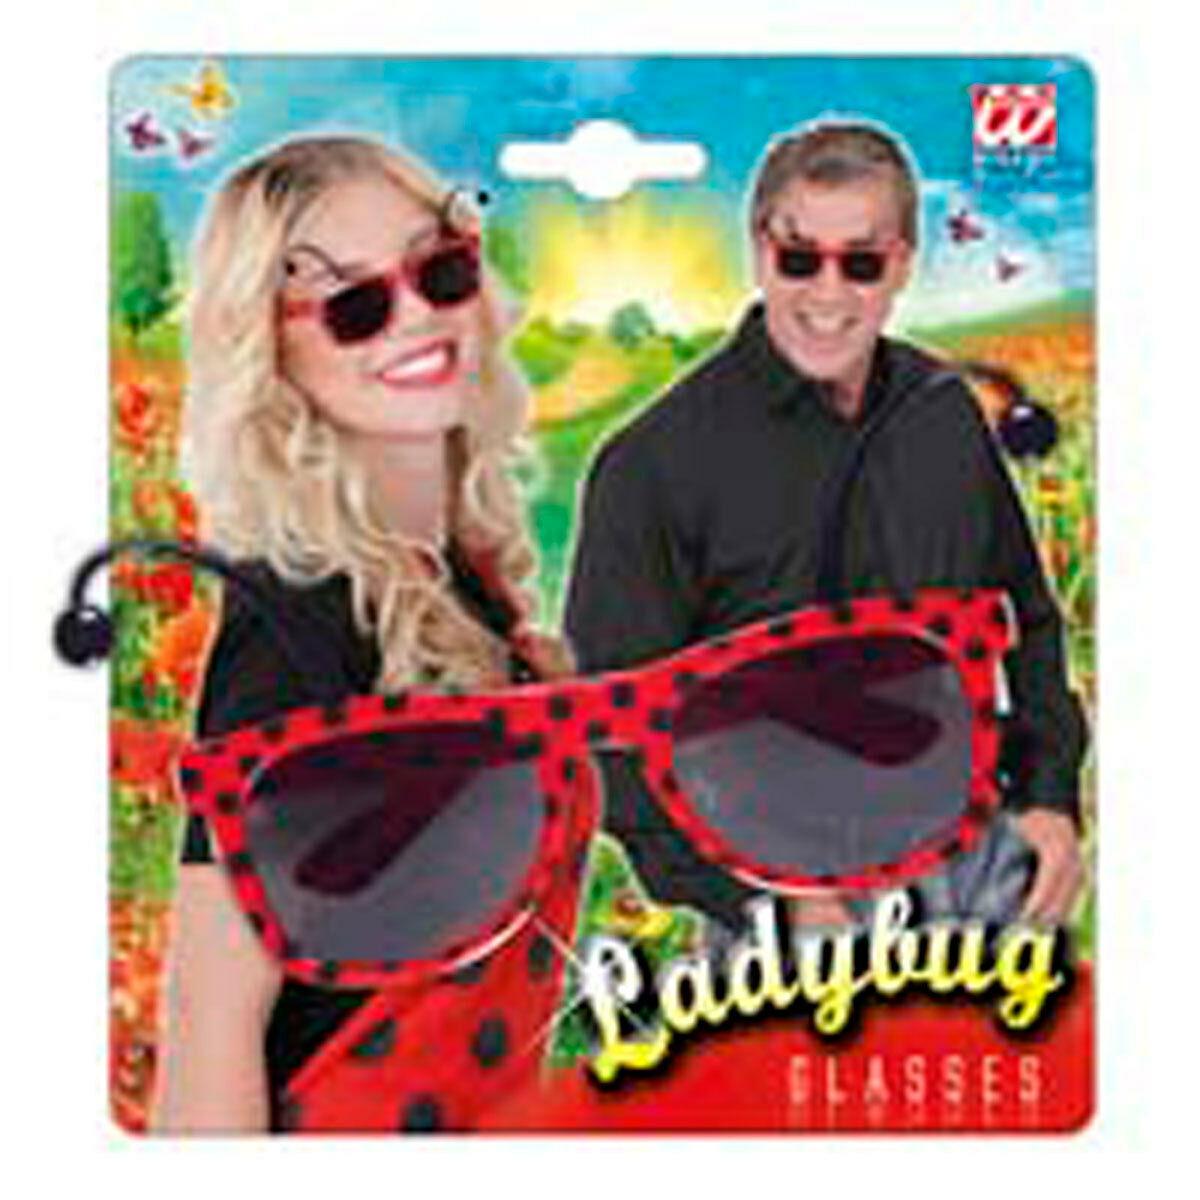 New Ladybug Sunglasses With Antenas Novelty Fancy Dress Accessories - Labreeze